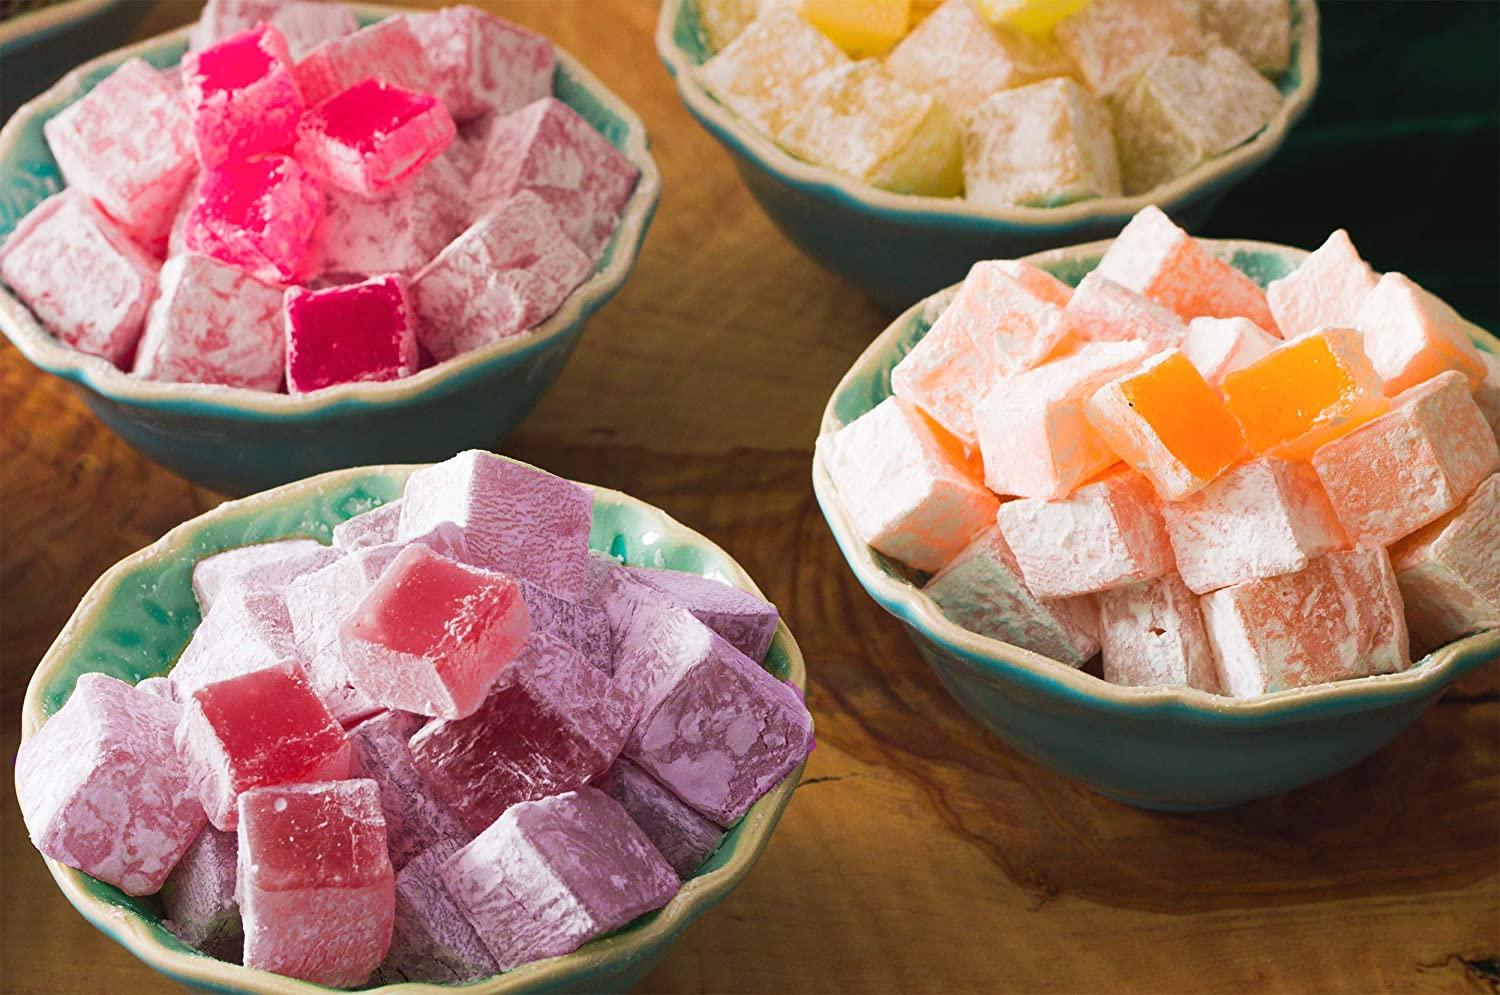 Turkish delights Mix - Traditional and tasty sweets lokums